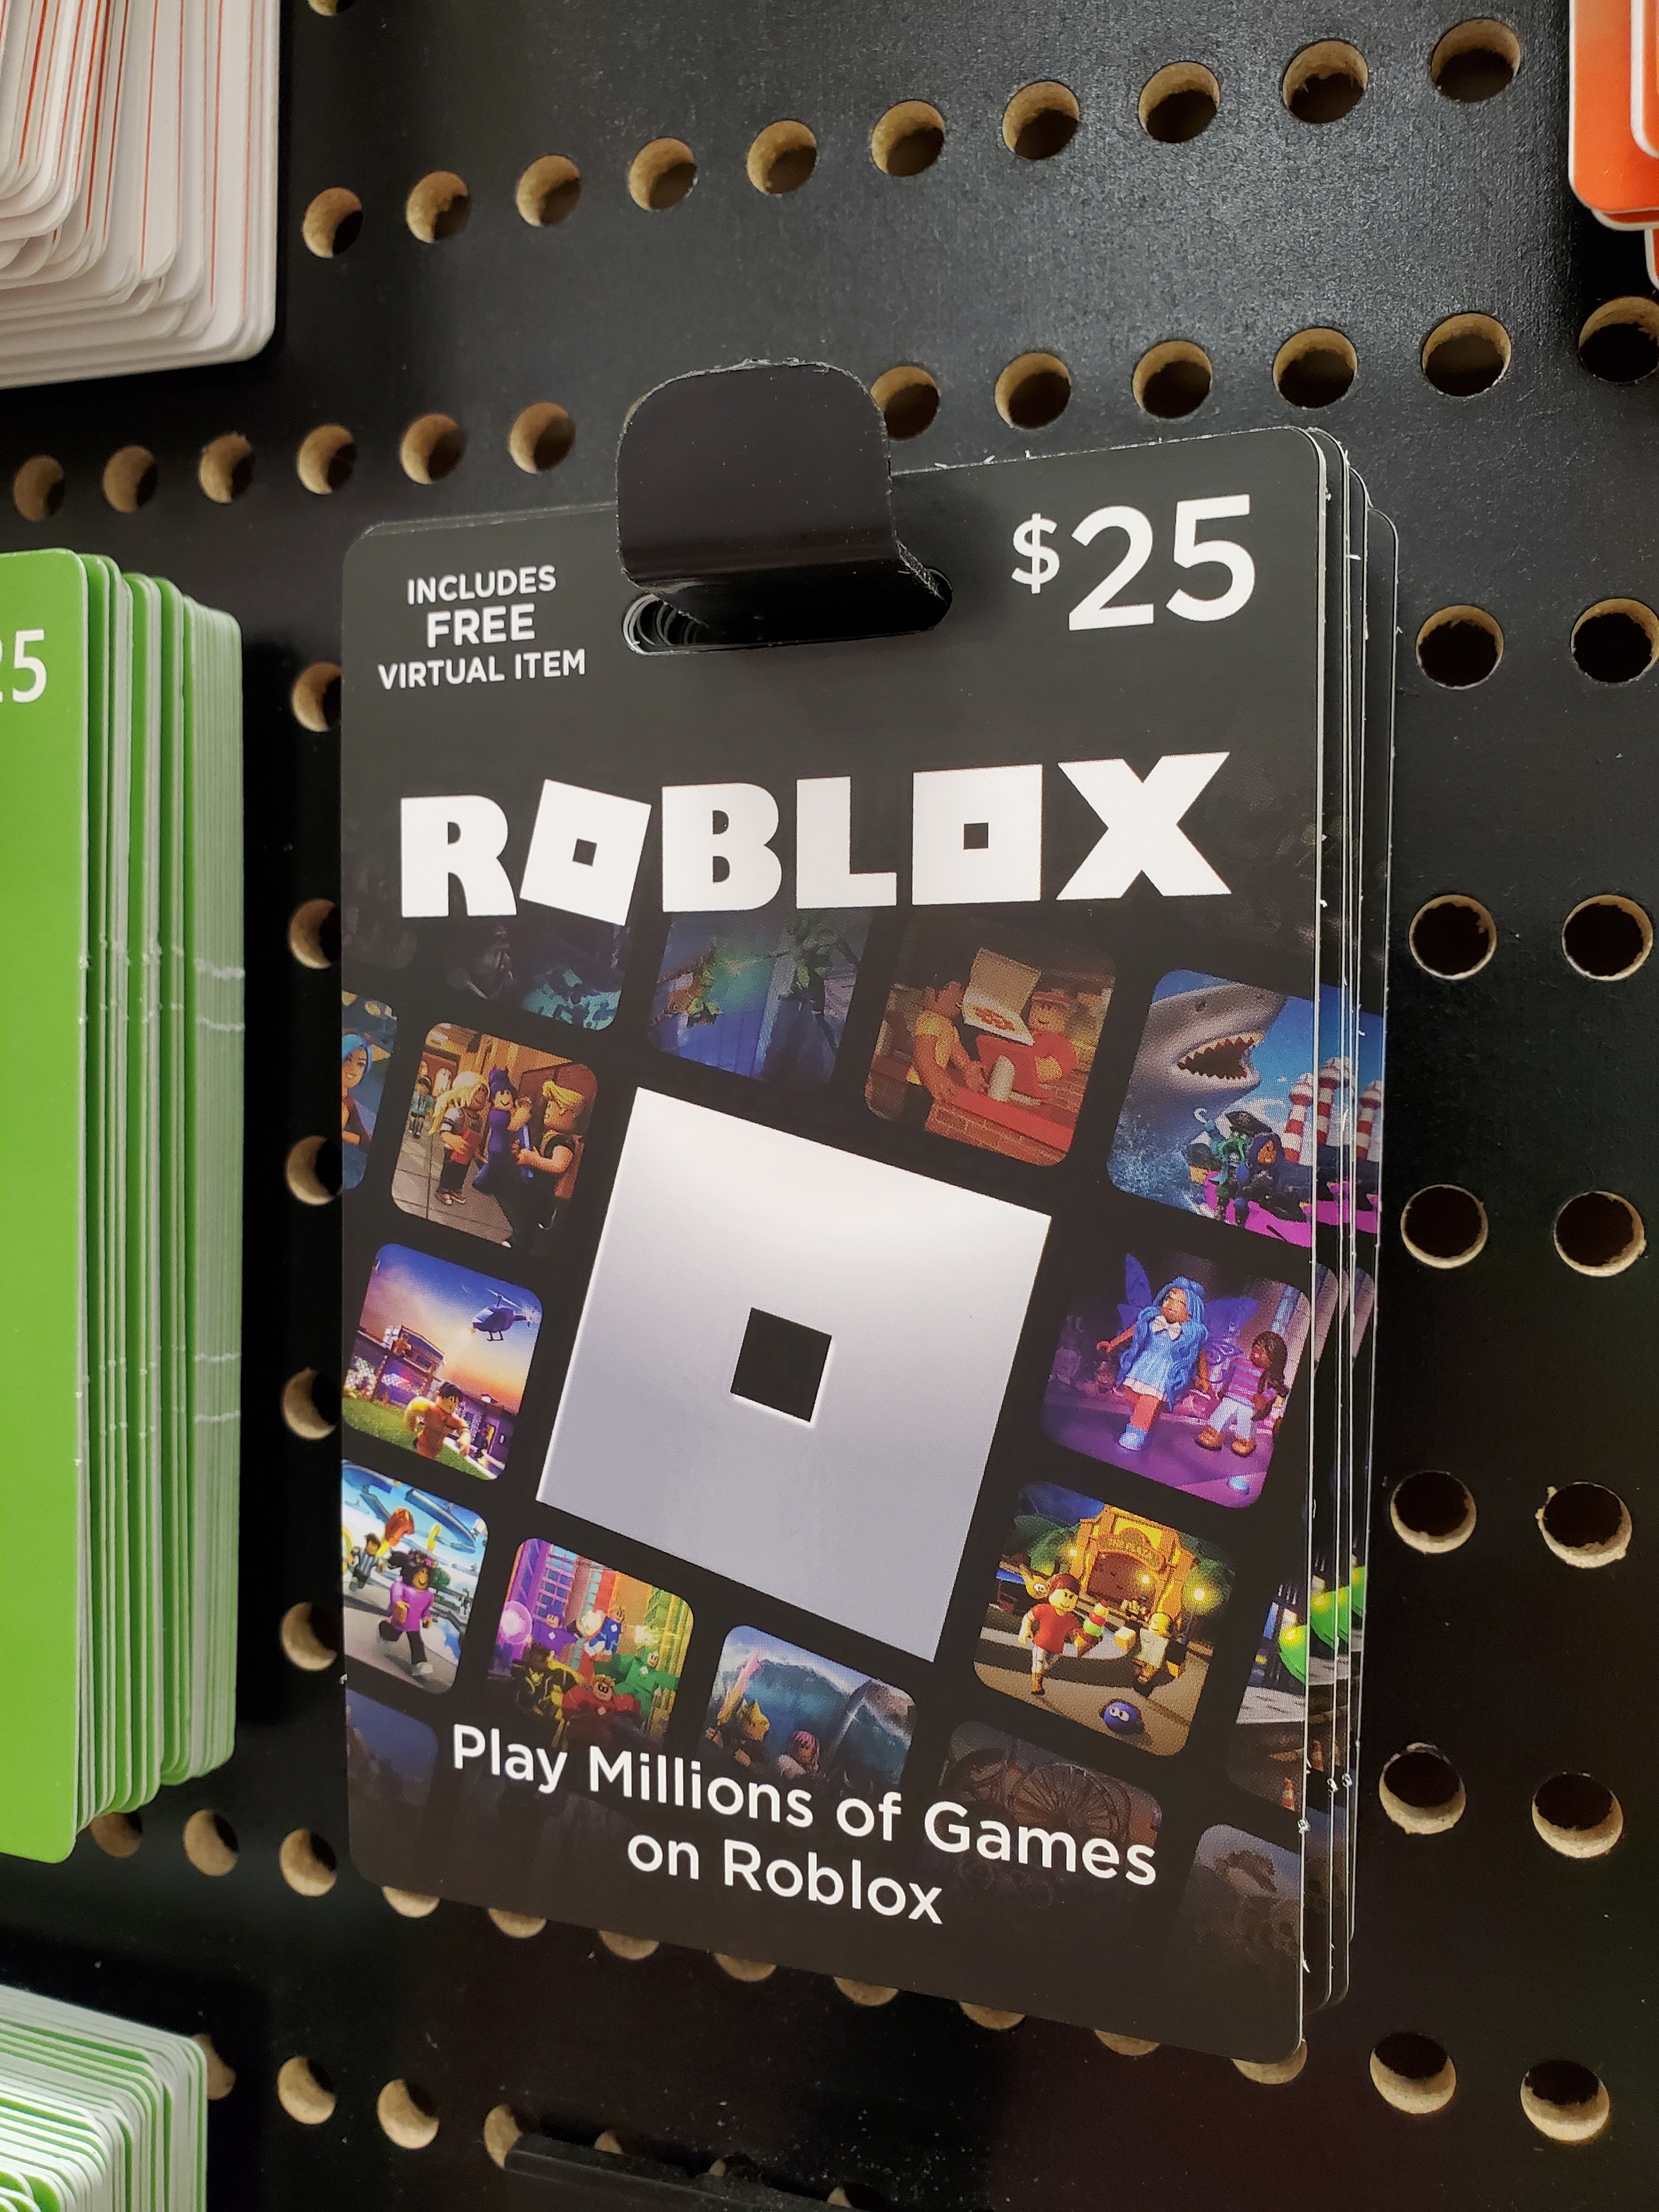 Robux and the Untold Story of Unregulated Digital Currency